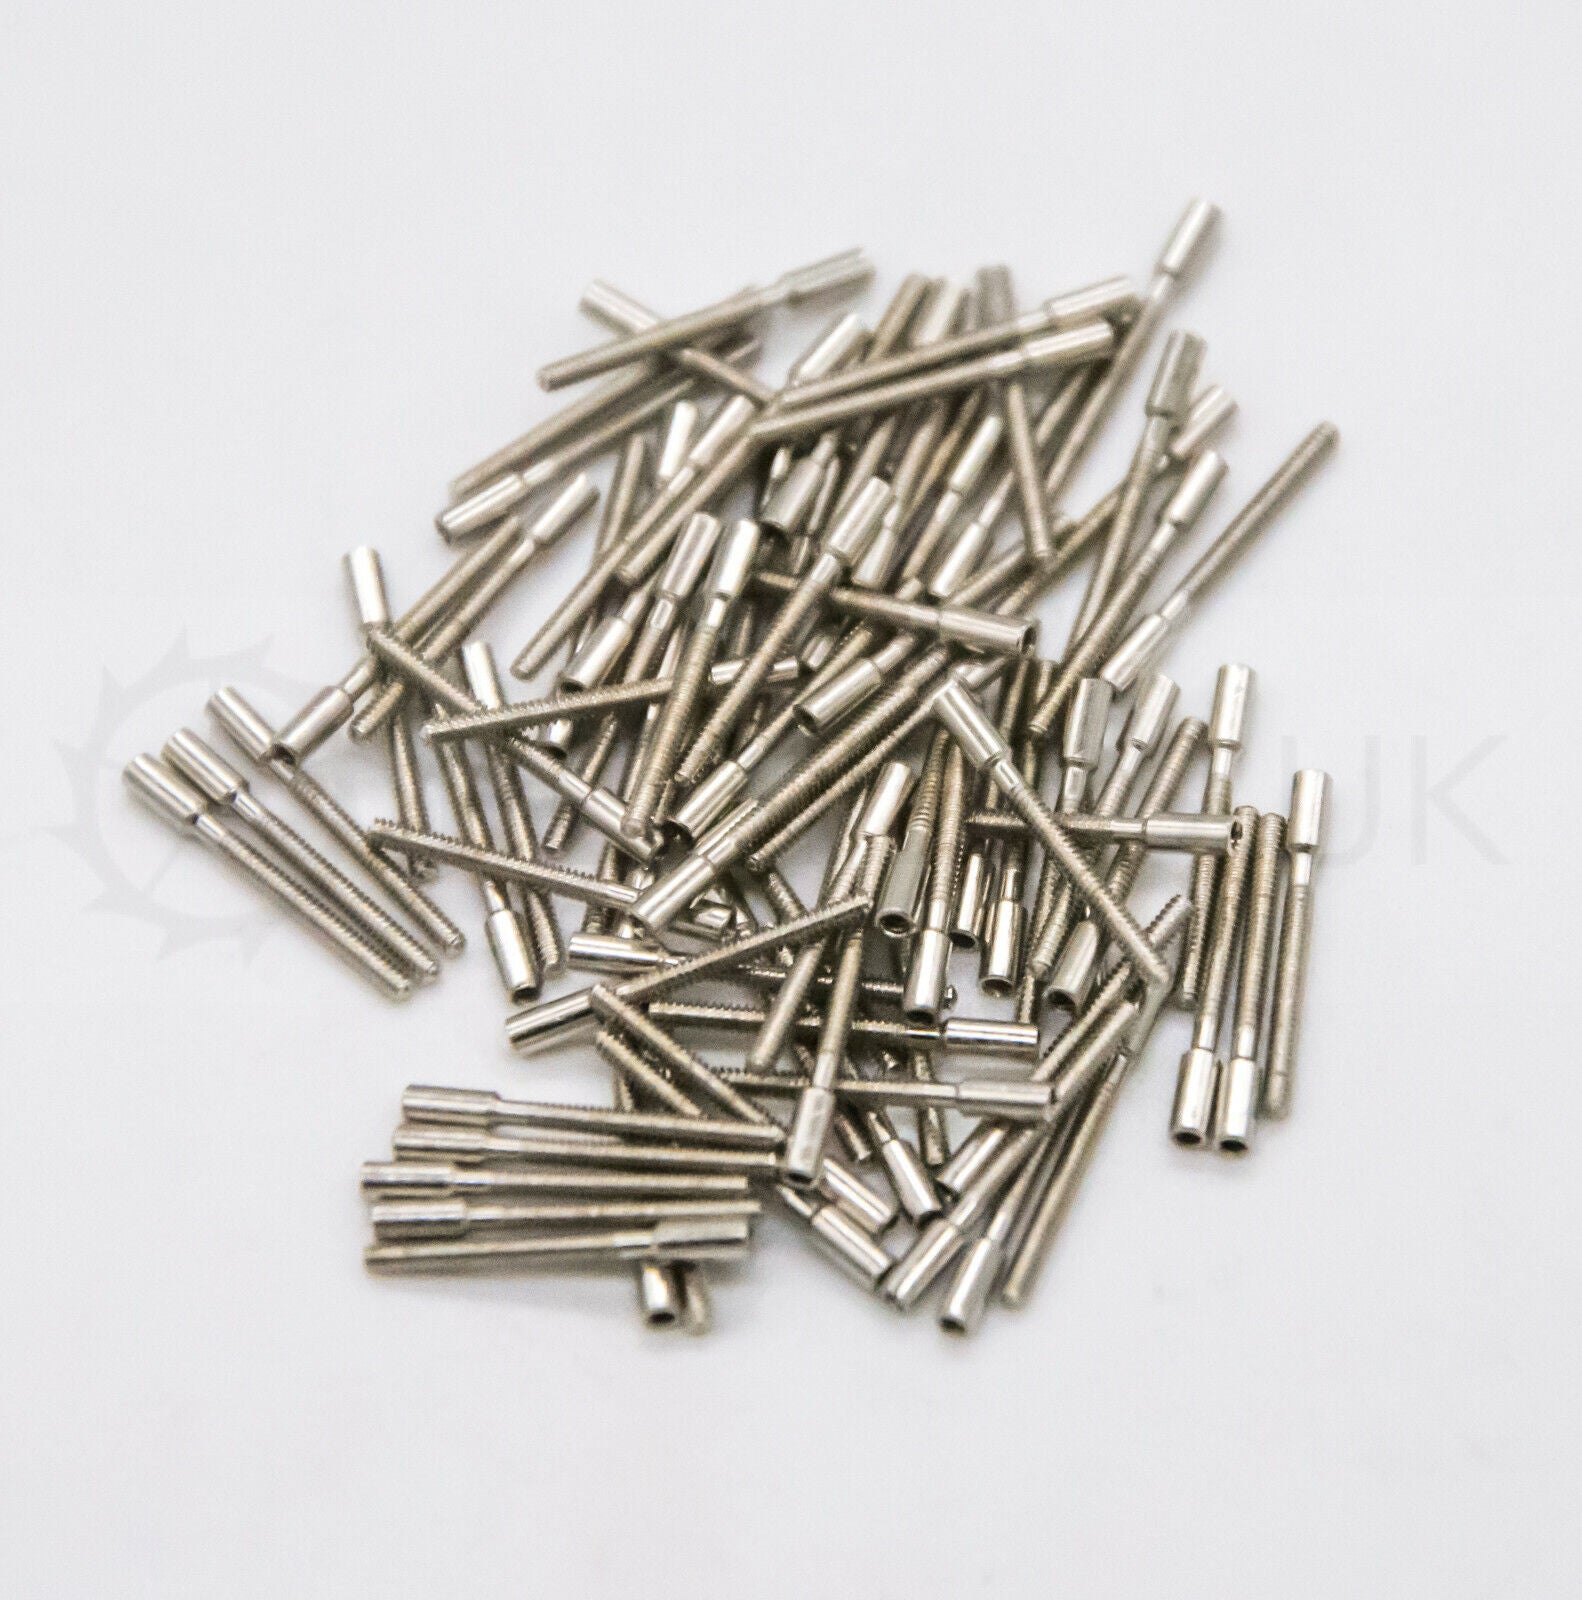 Stem Extentions (Pk of 100) 0.7 and 0.9mm Threads